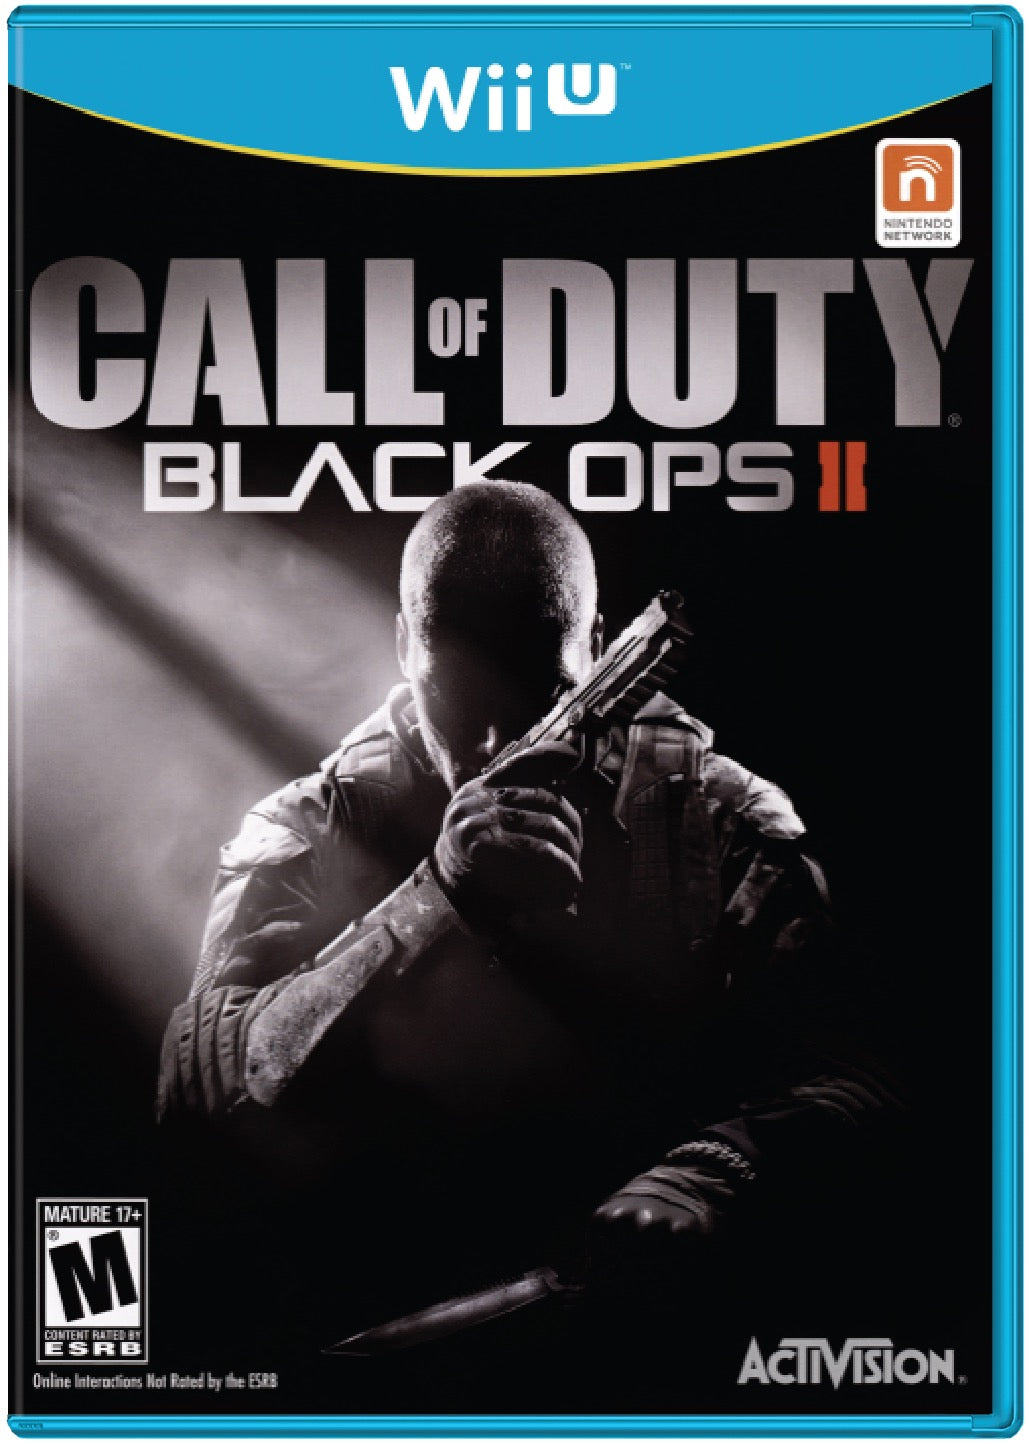 Call of Duty Black Ops II Cover Art and Product Photo